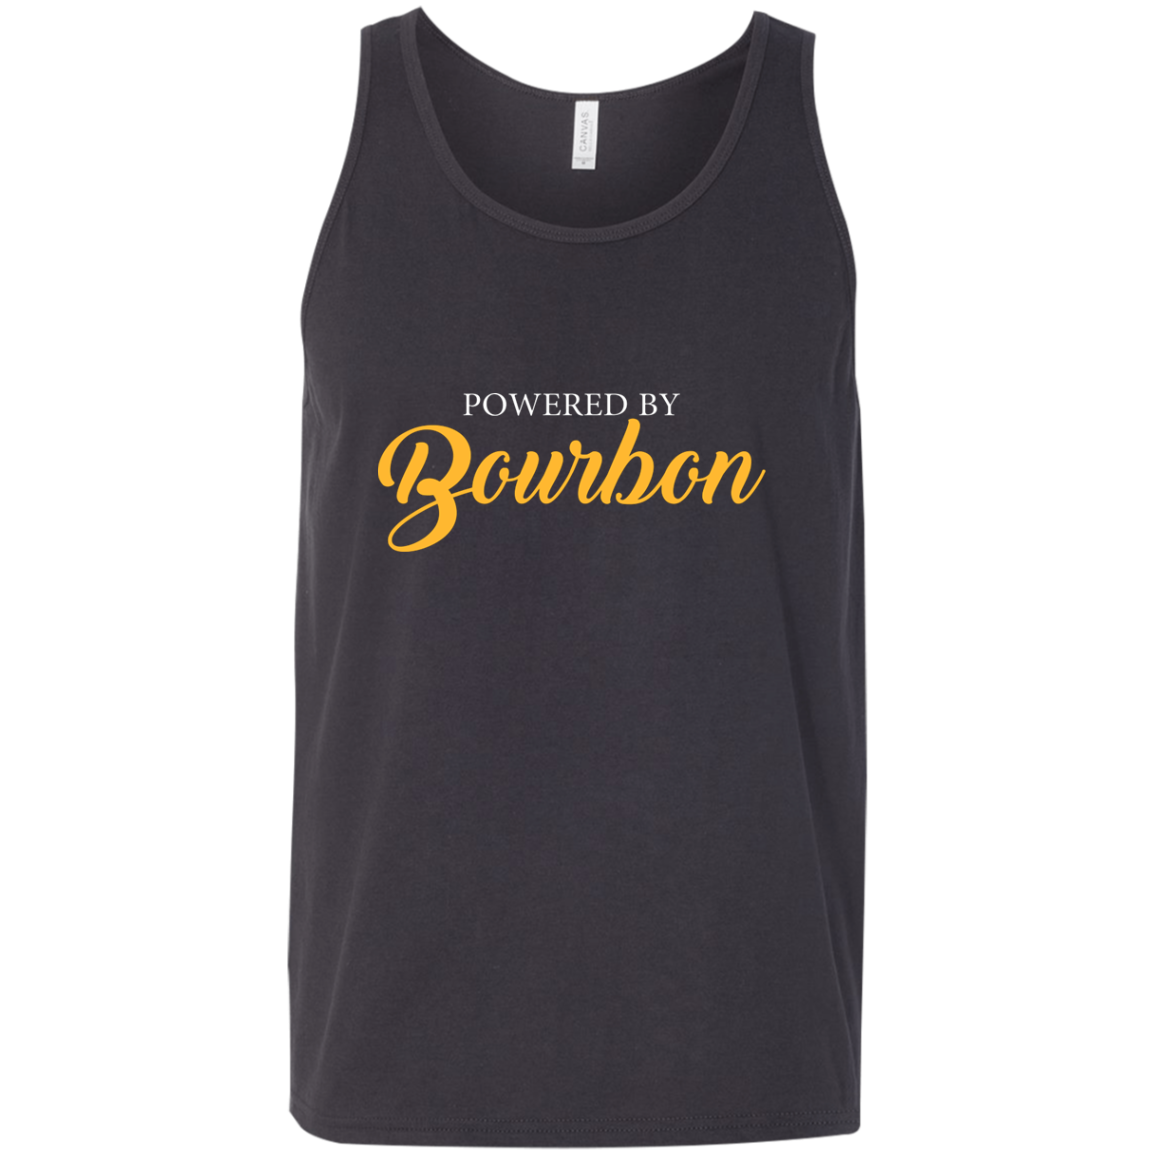 Powered By Bourbon Tank Top Apparel - The Beer Lodge